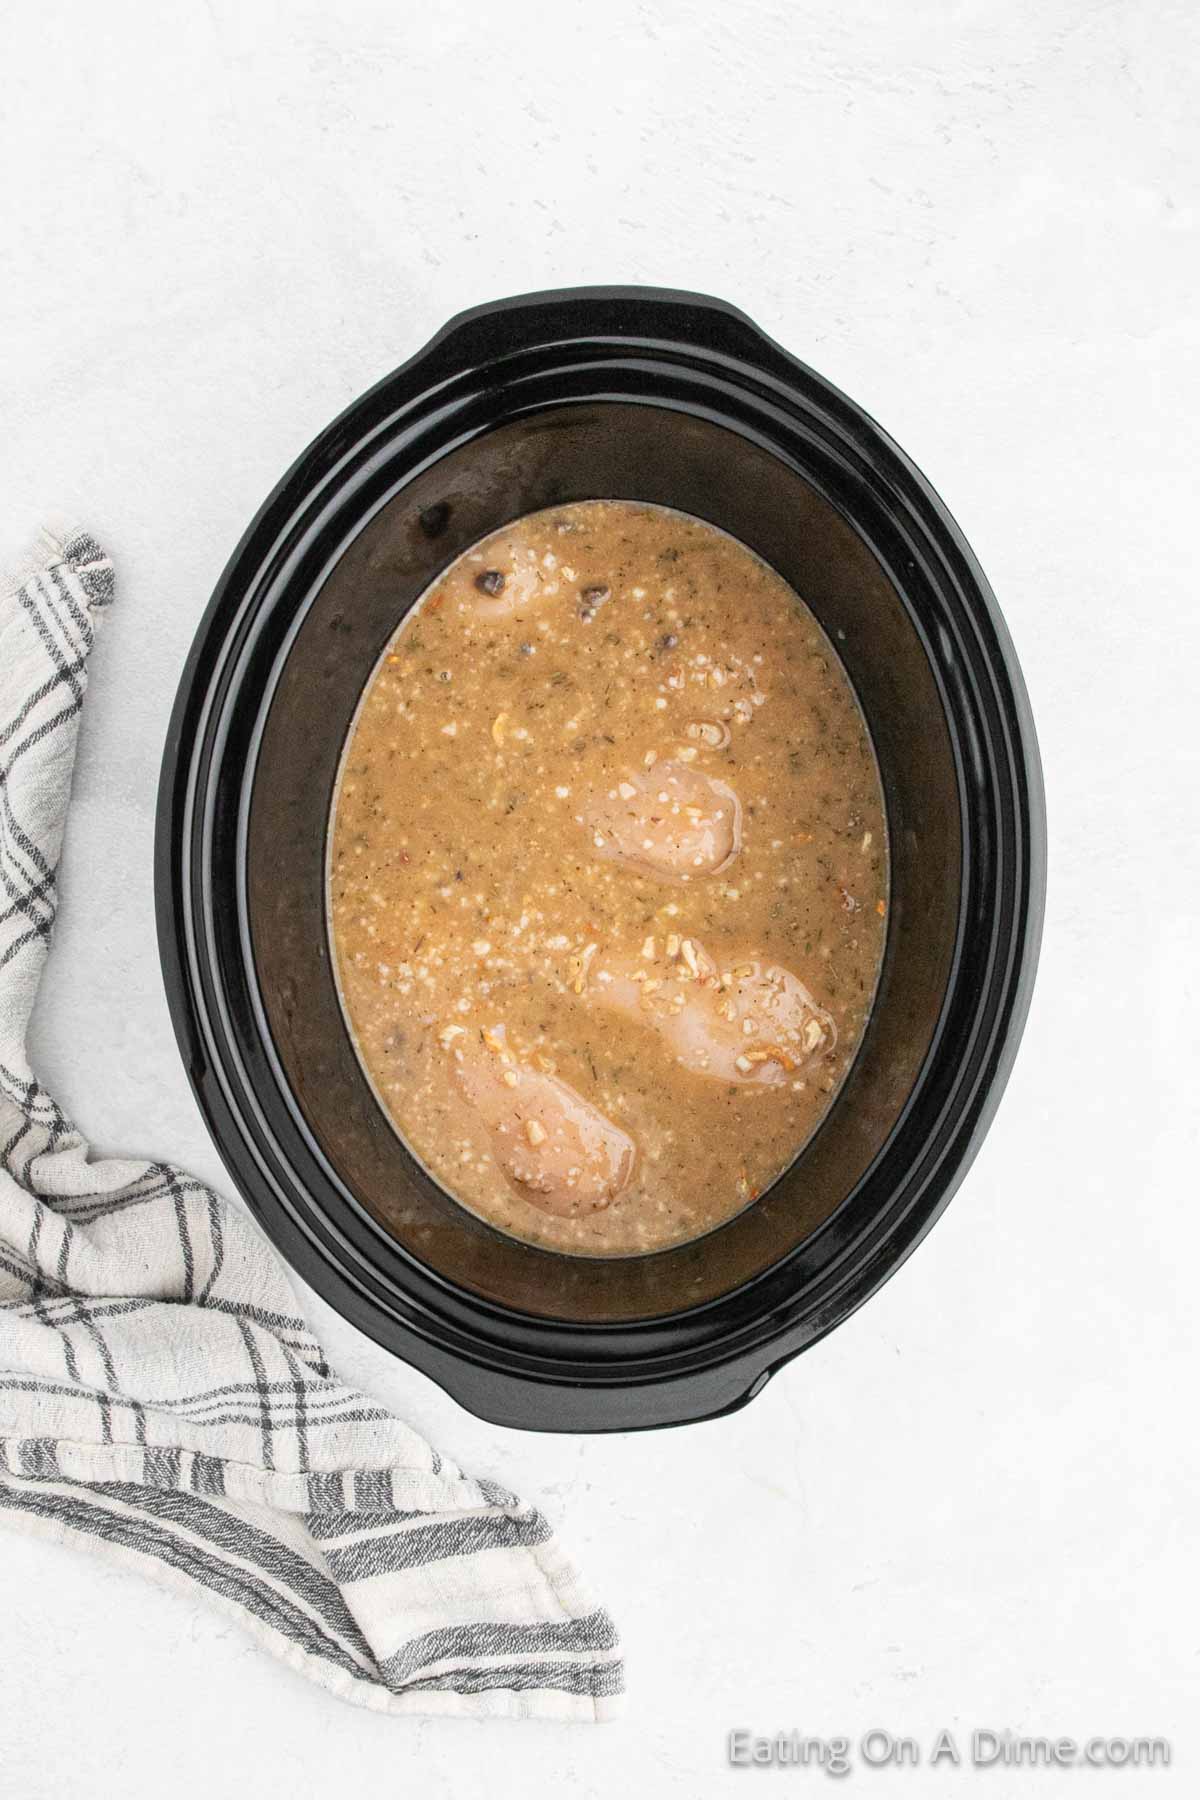 Top the chicken breast with the cream of mushroom mixture in the slow cooker